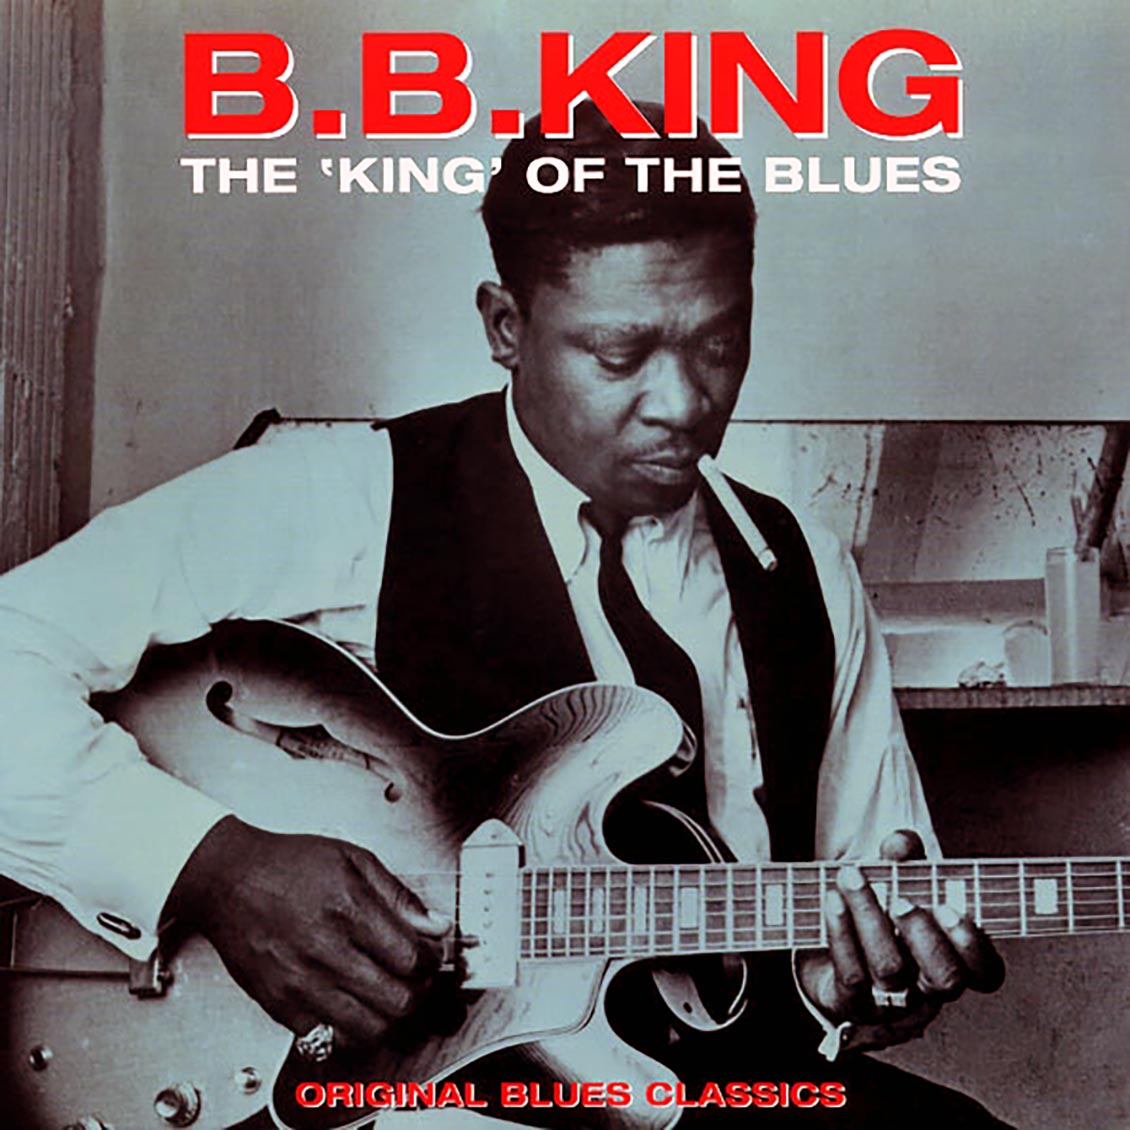 BB King "The King of Blues" LP